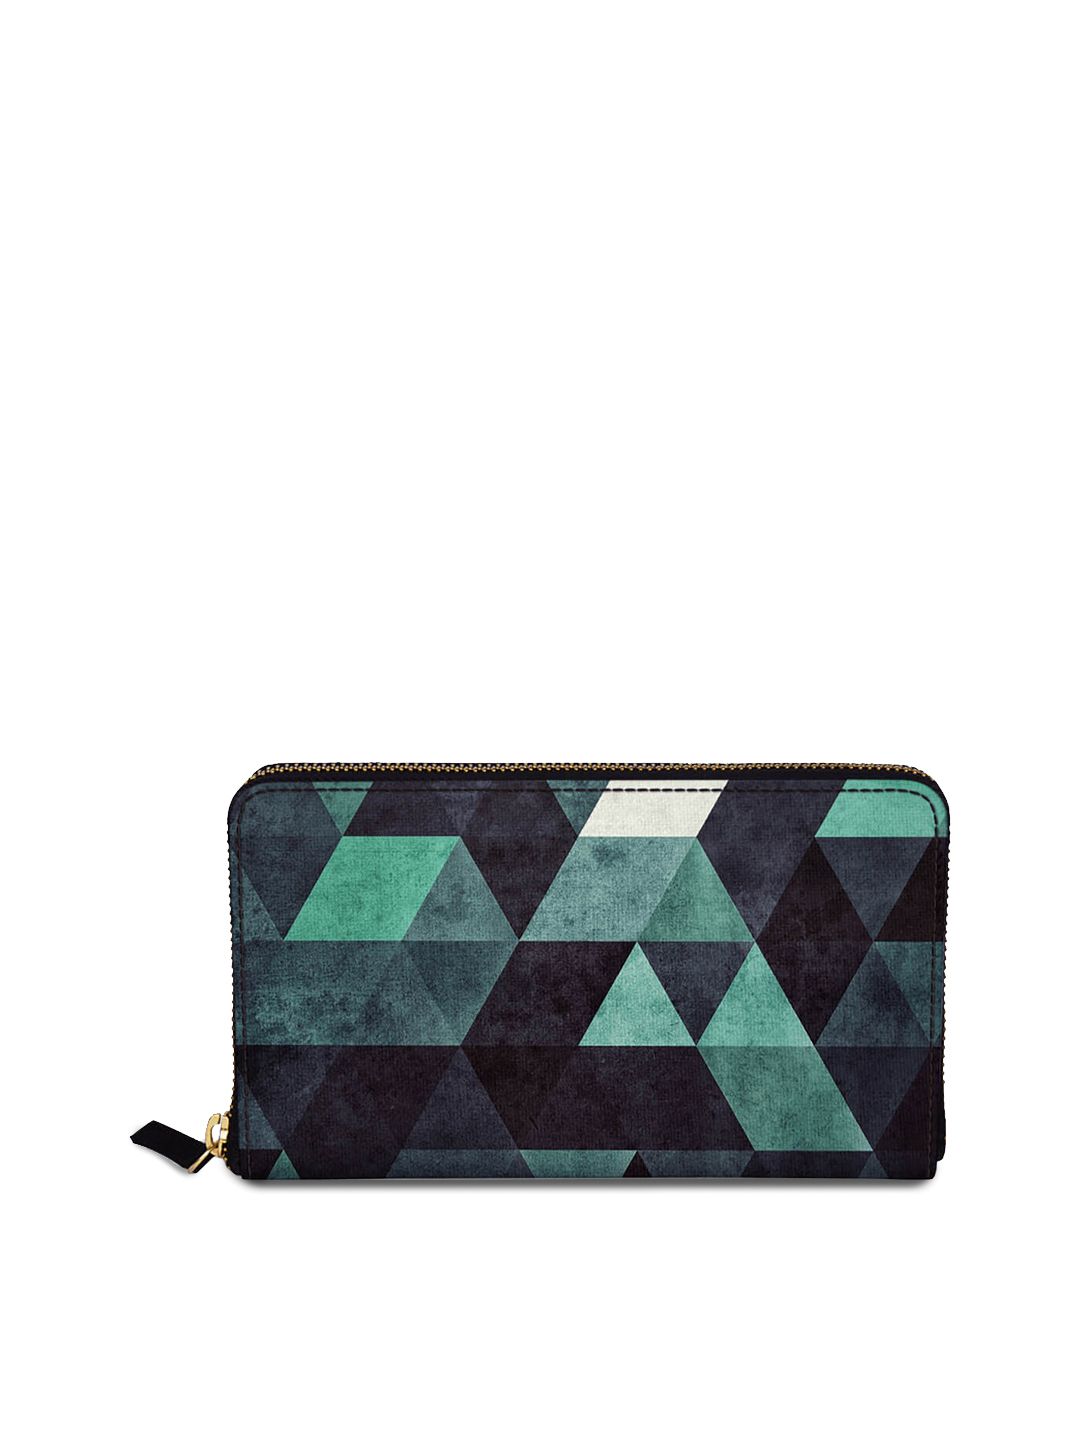 DailyObjects Ddrypp Hrxtl Women's Classic Wallet Price in India